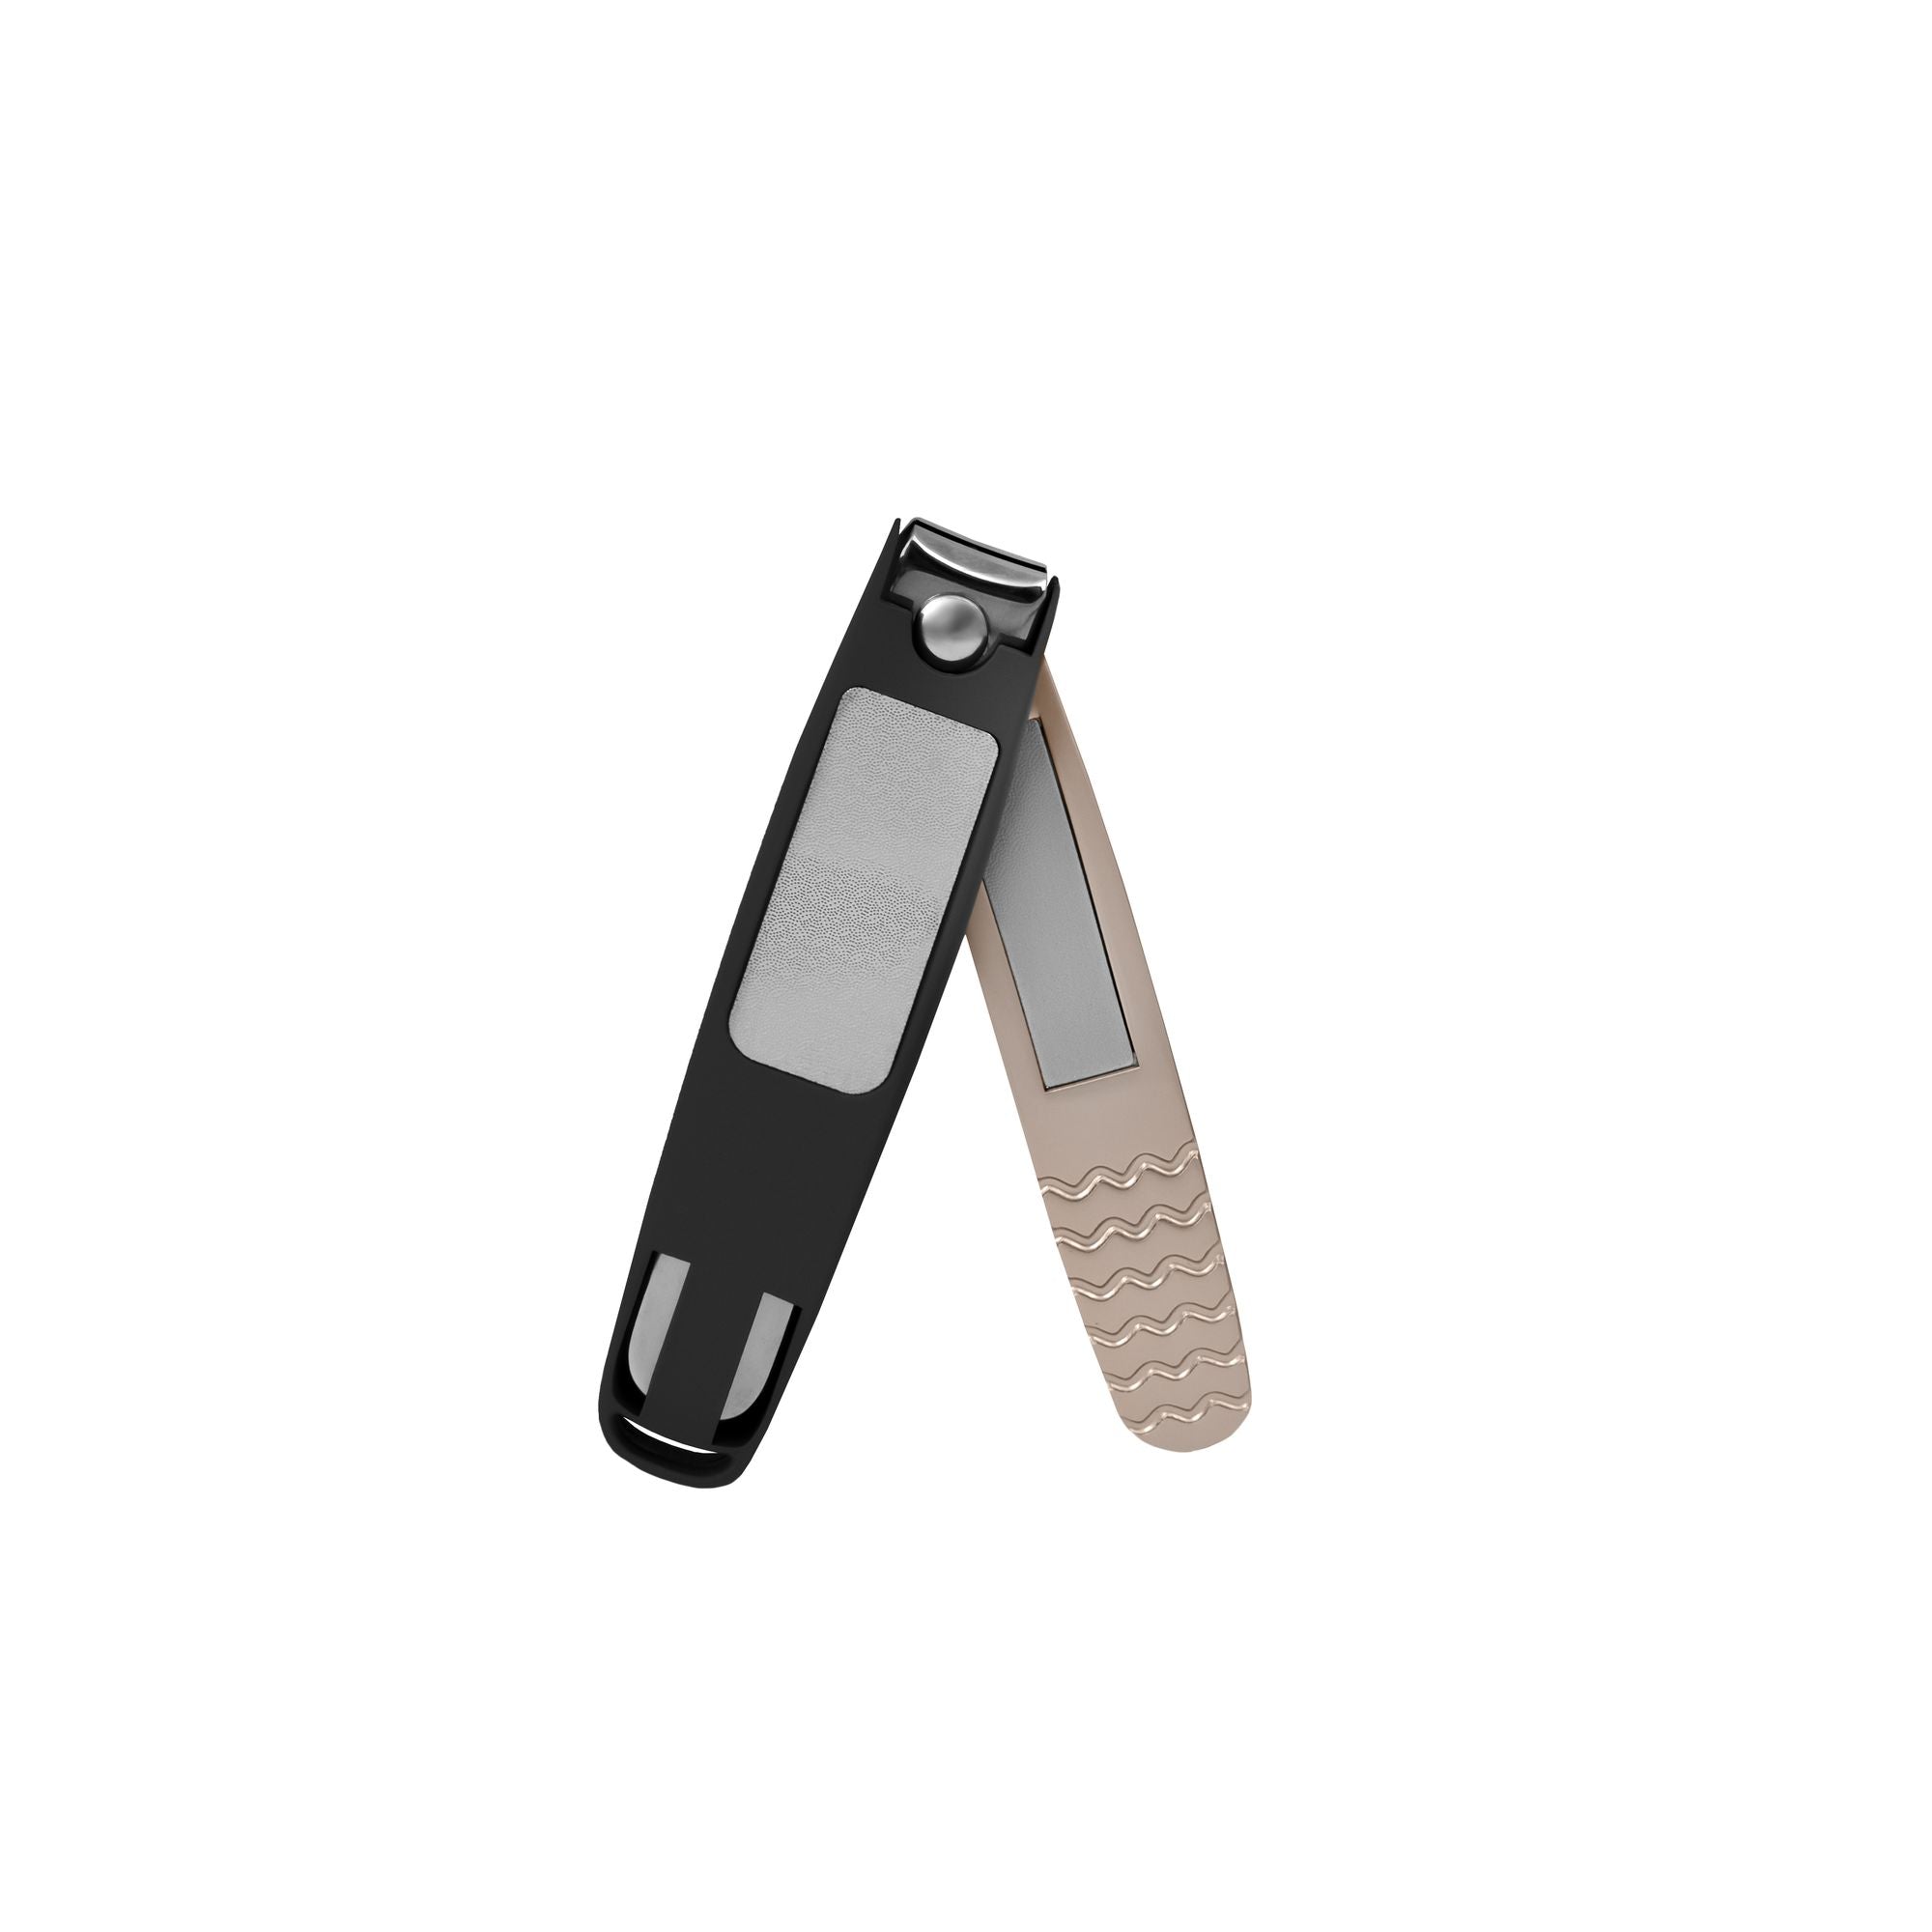 Staleks Pro Nail Clippers - With Container